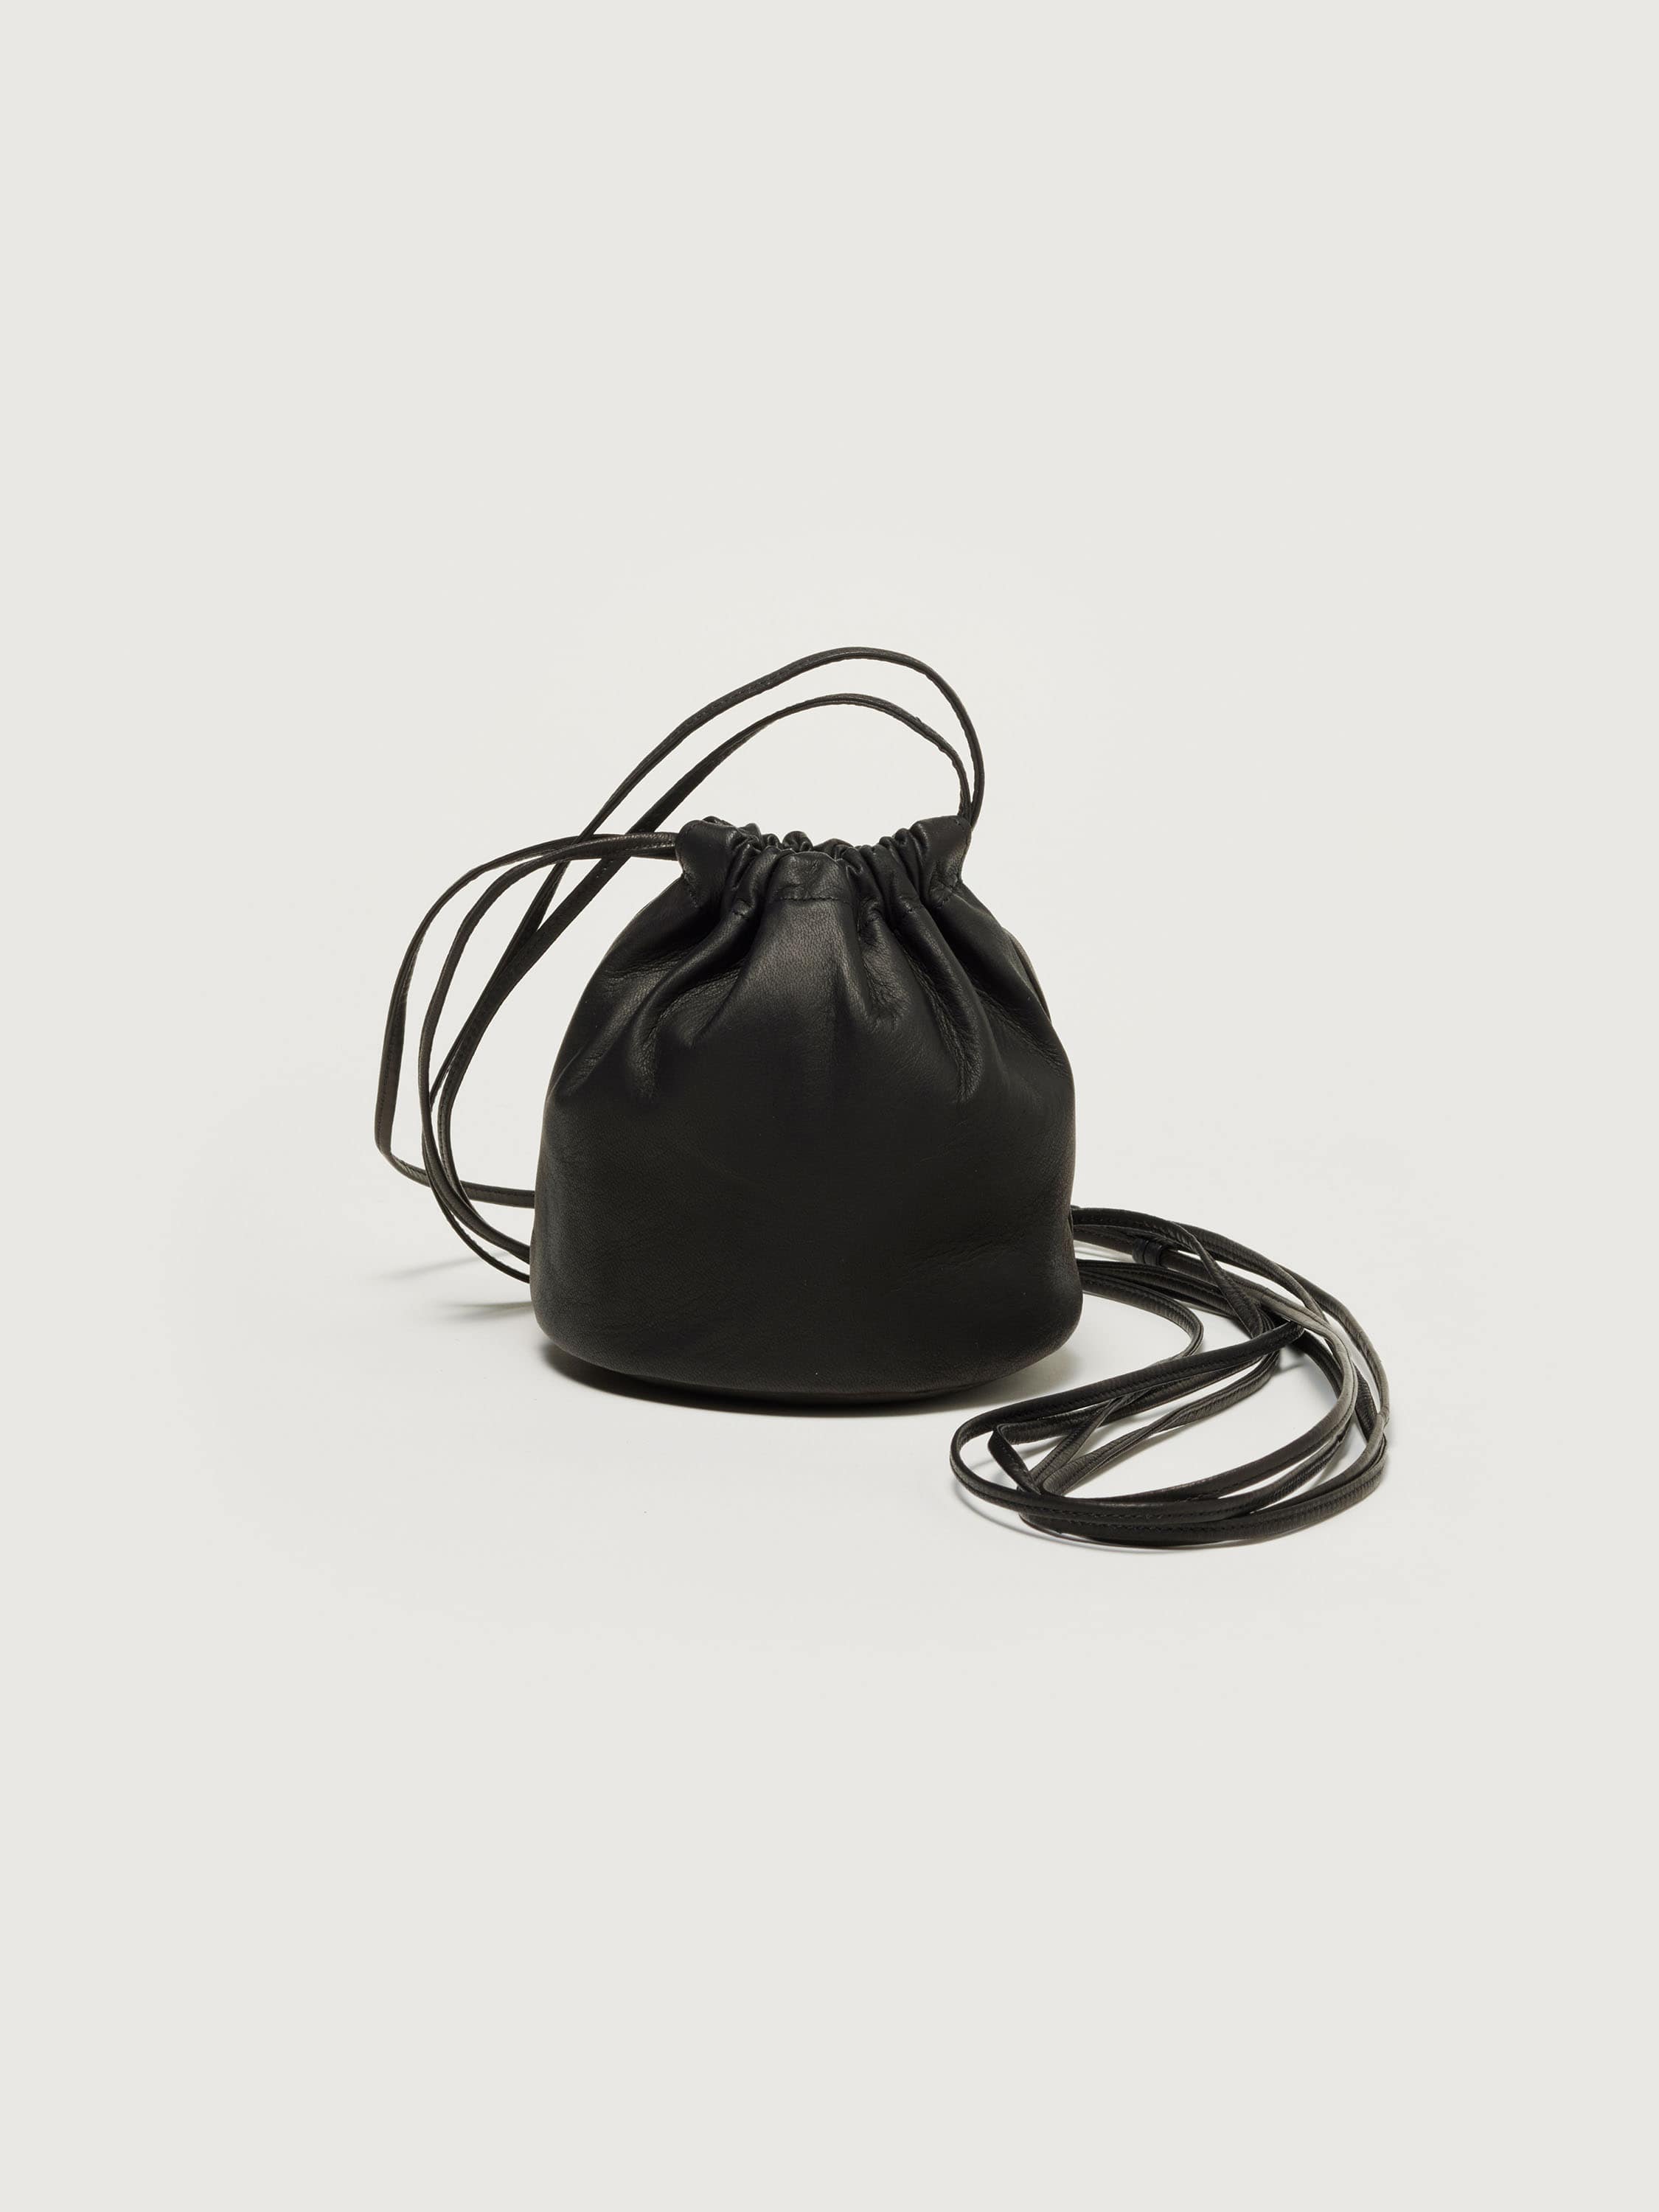 LEATHER SMALL ROUND STRING POUCH 詳細画像 BLACK 1